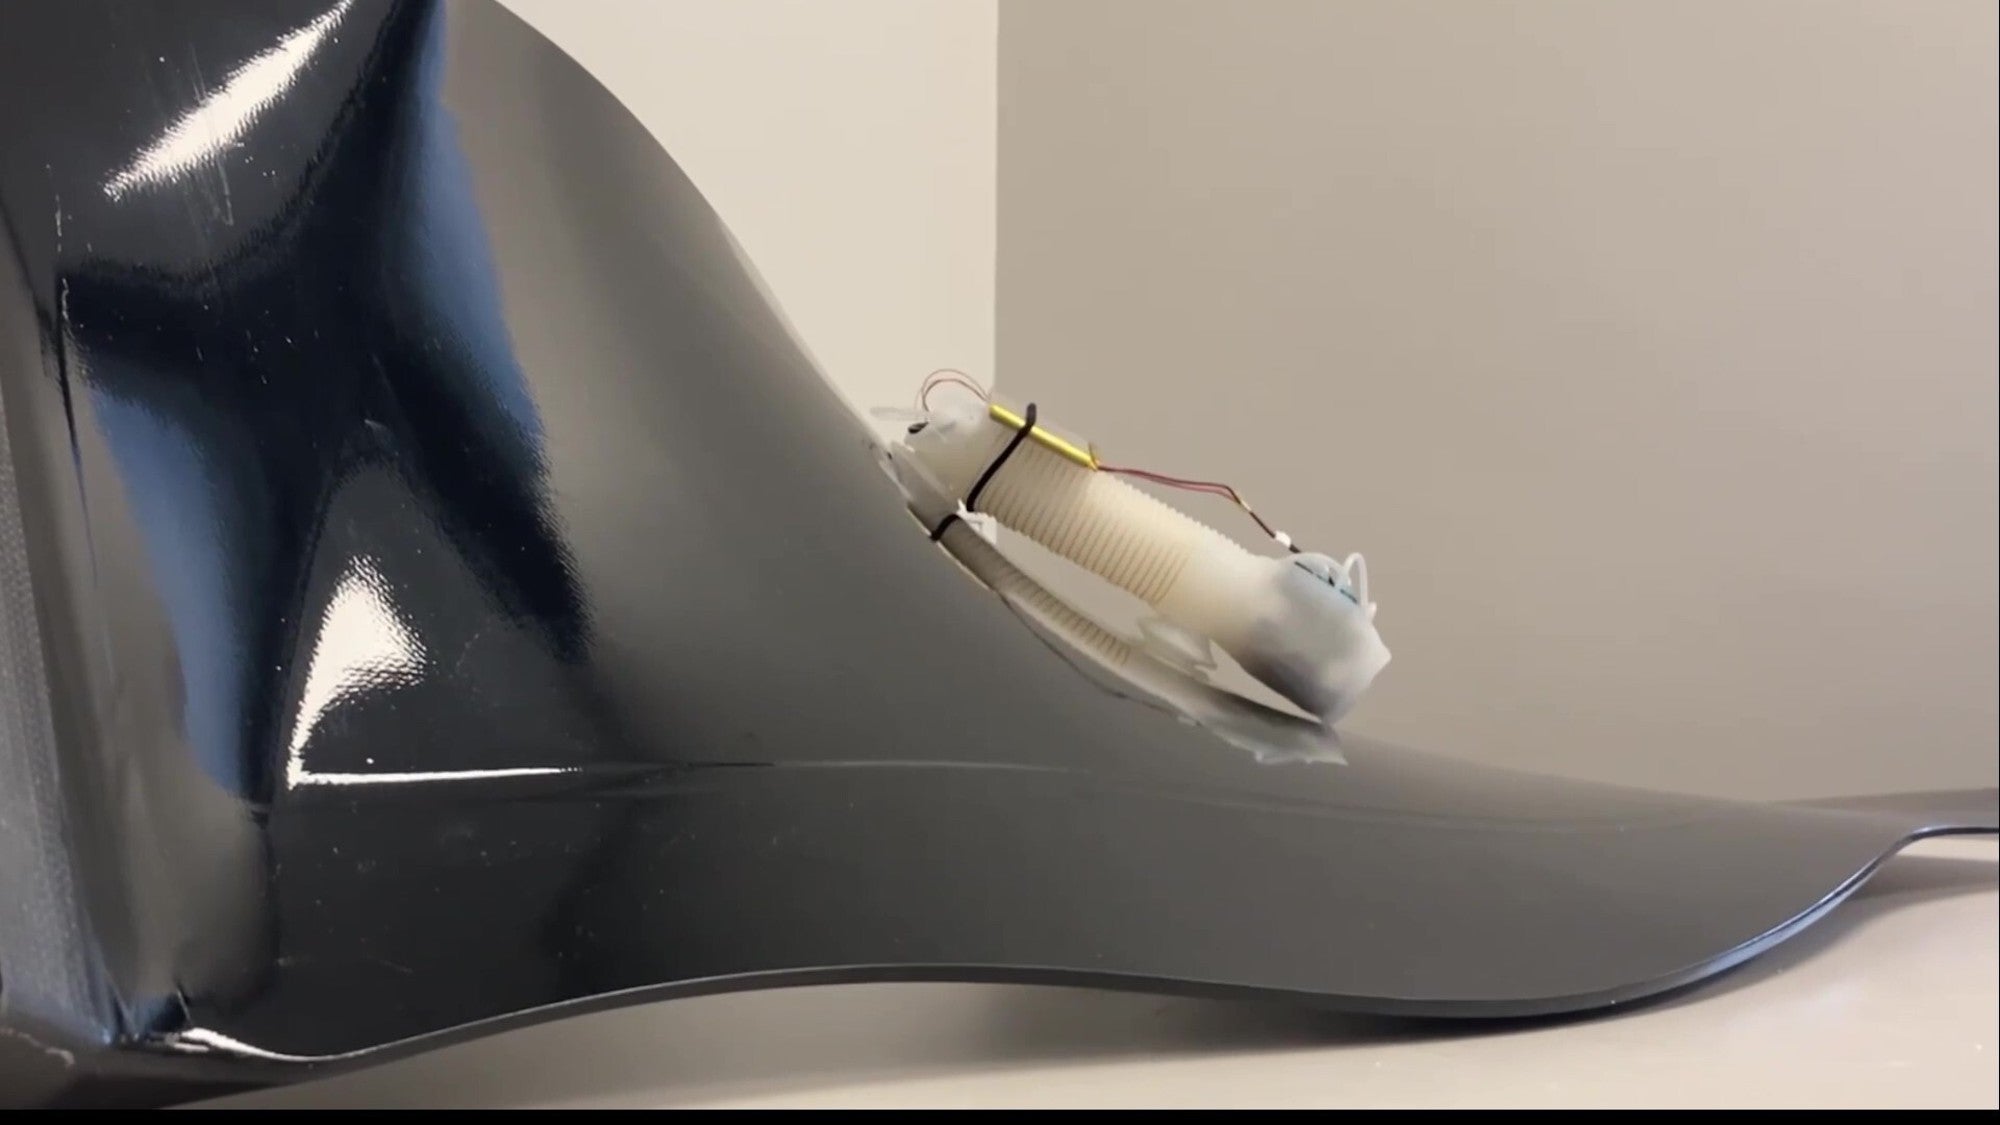 This wormy robot can wriggle its way around a jet engine